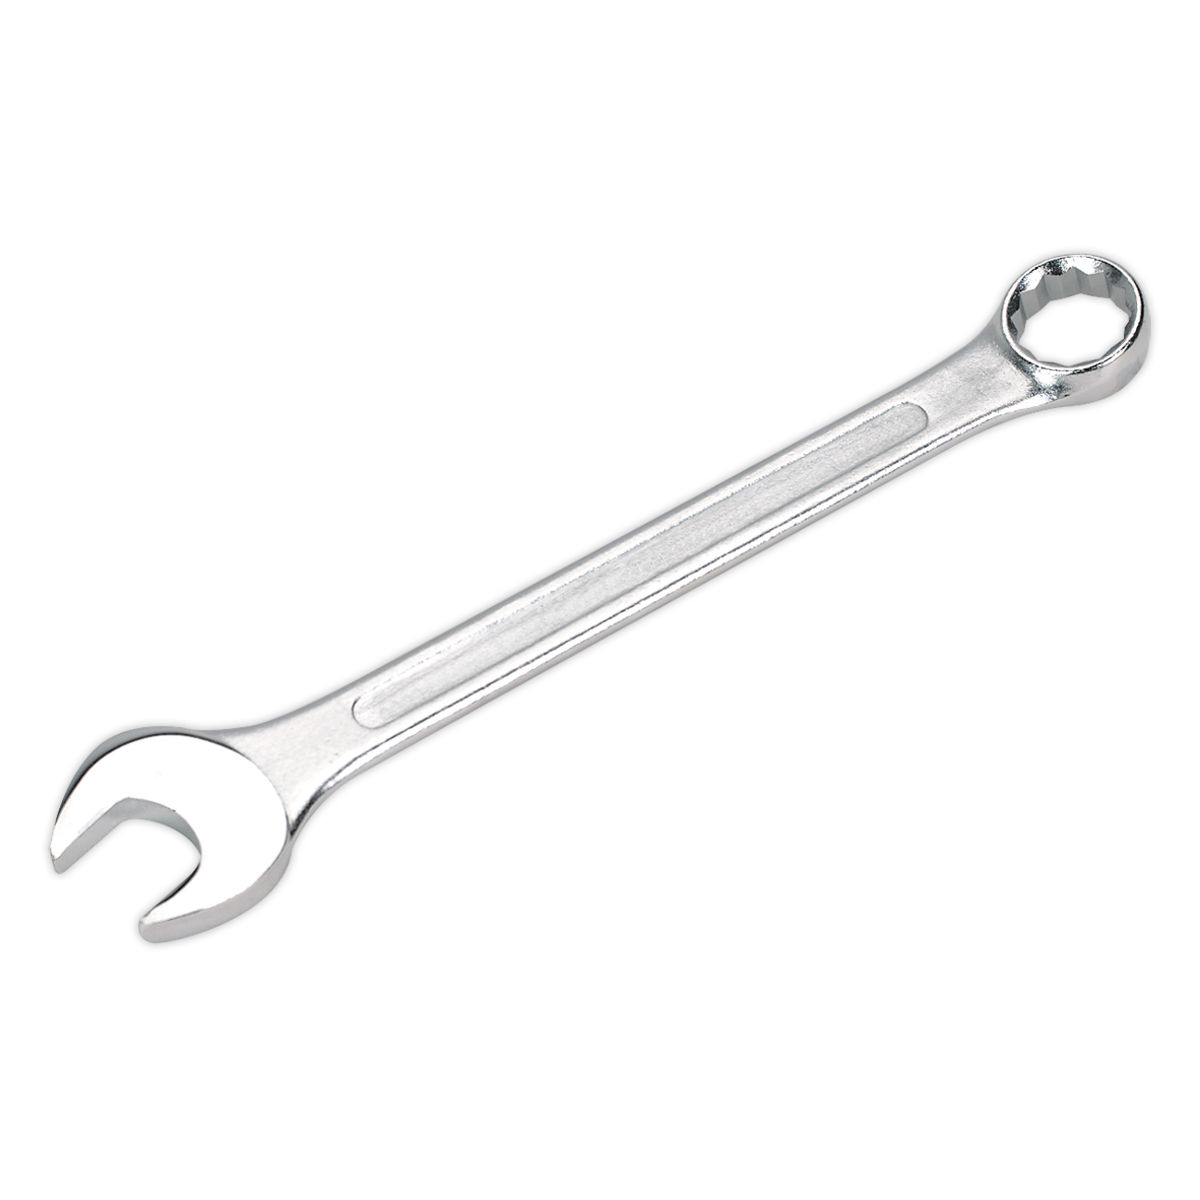 Sealey S0406 Combination Spanner 6mm